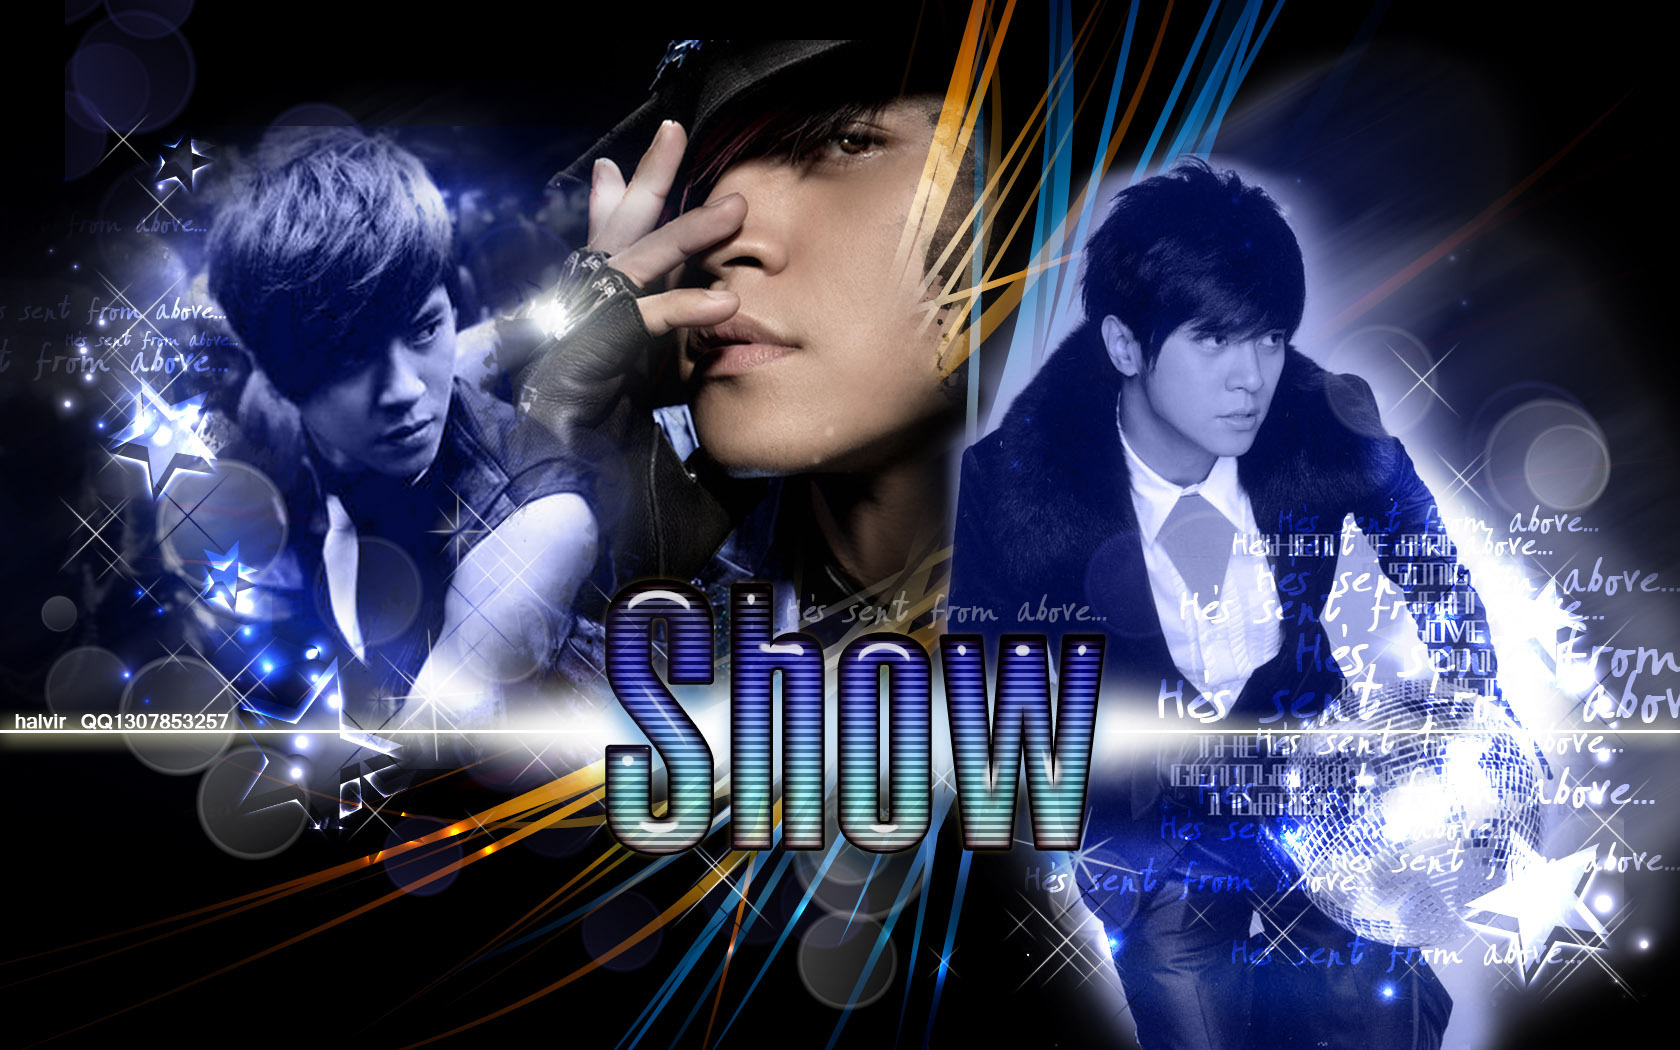 wallpaper Show Luo   Show Luo Wallpaper 17172084